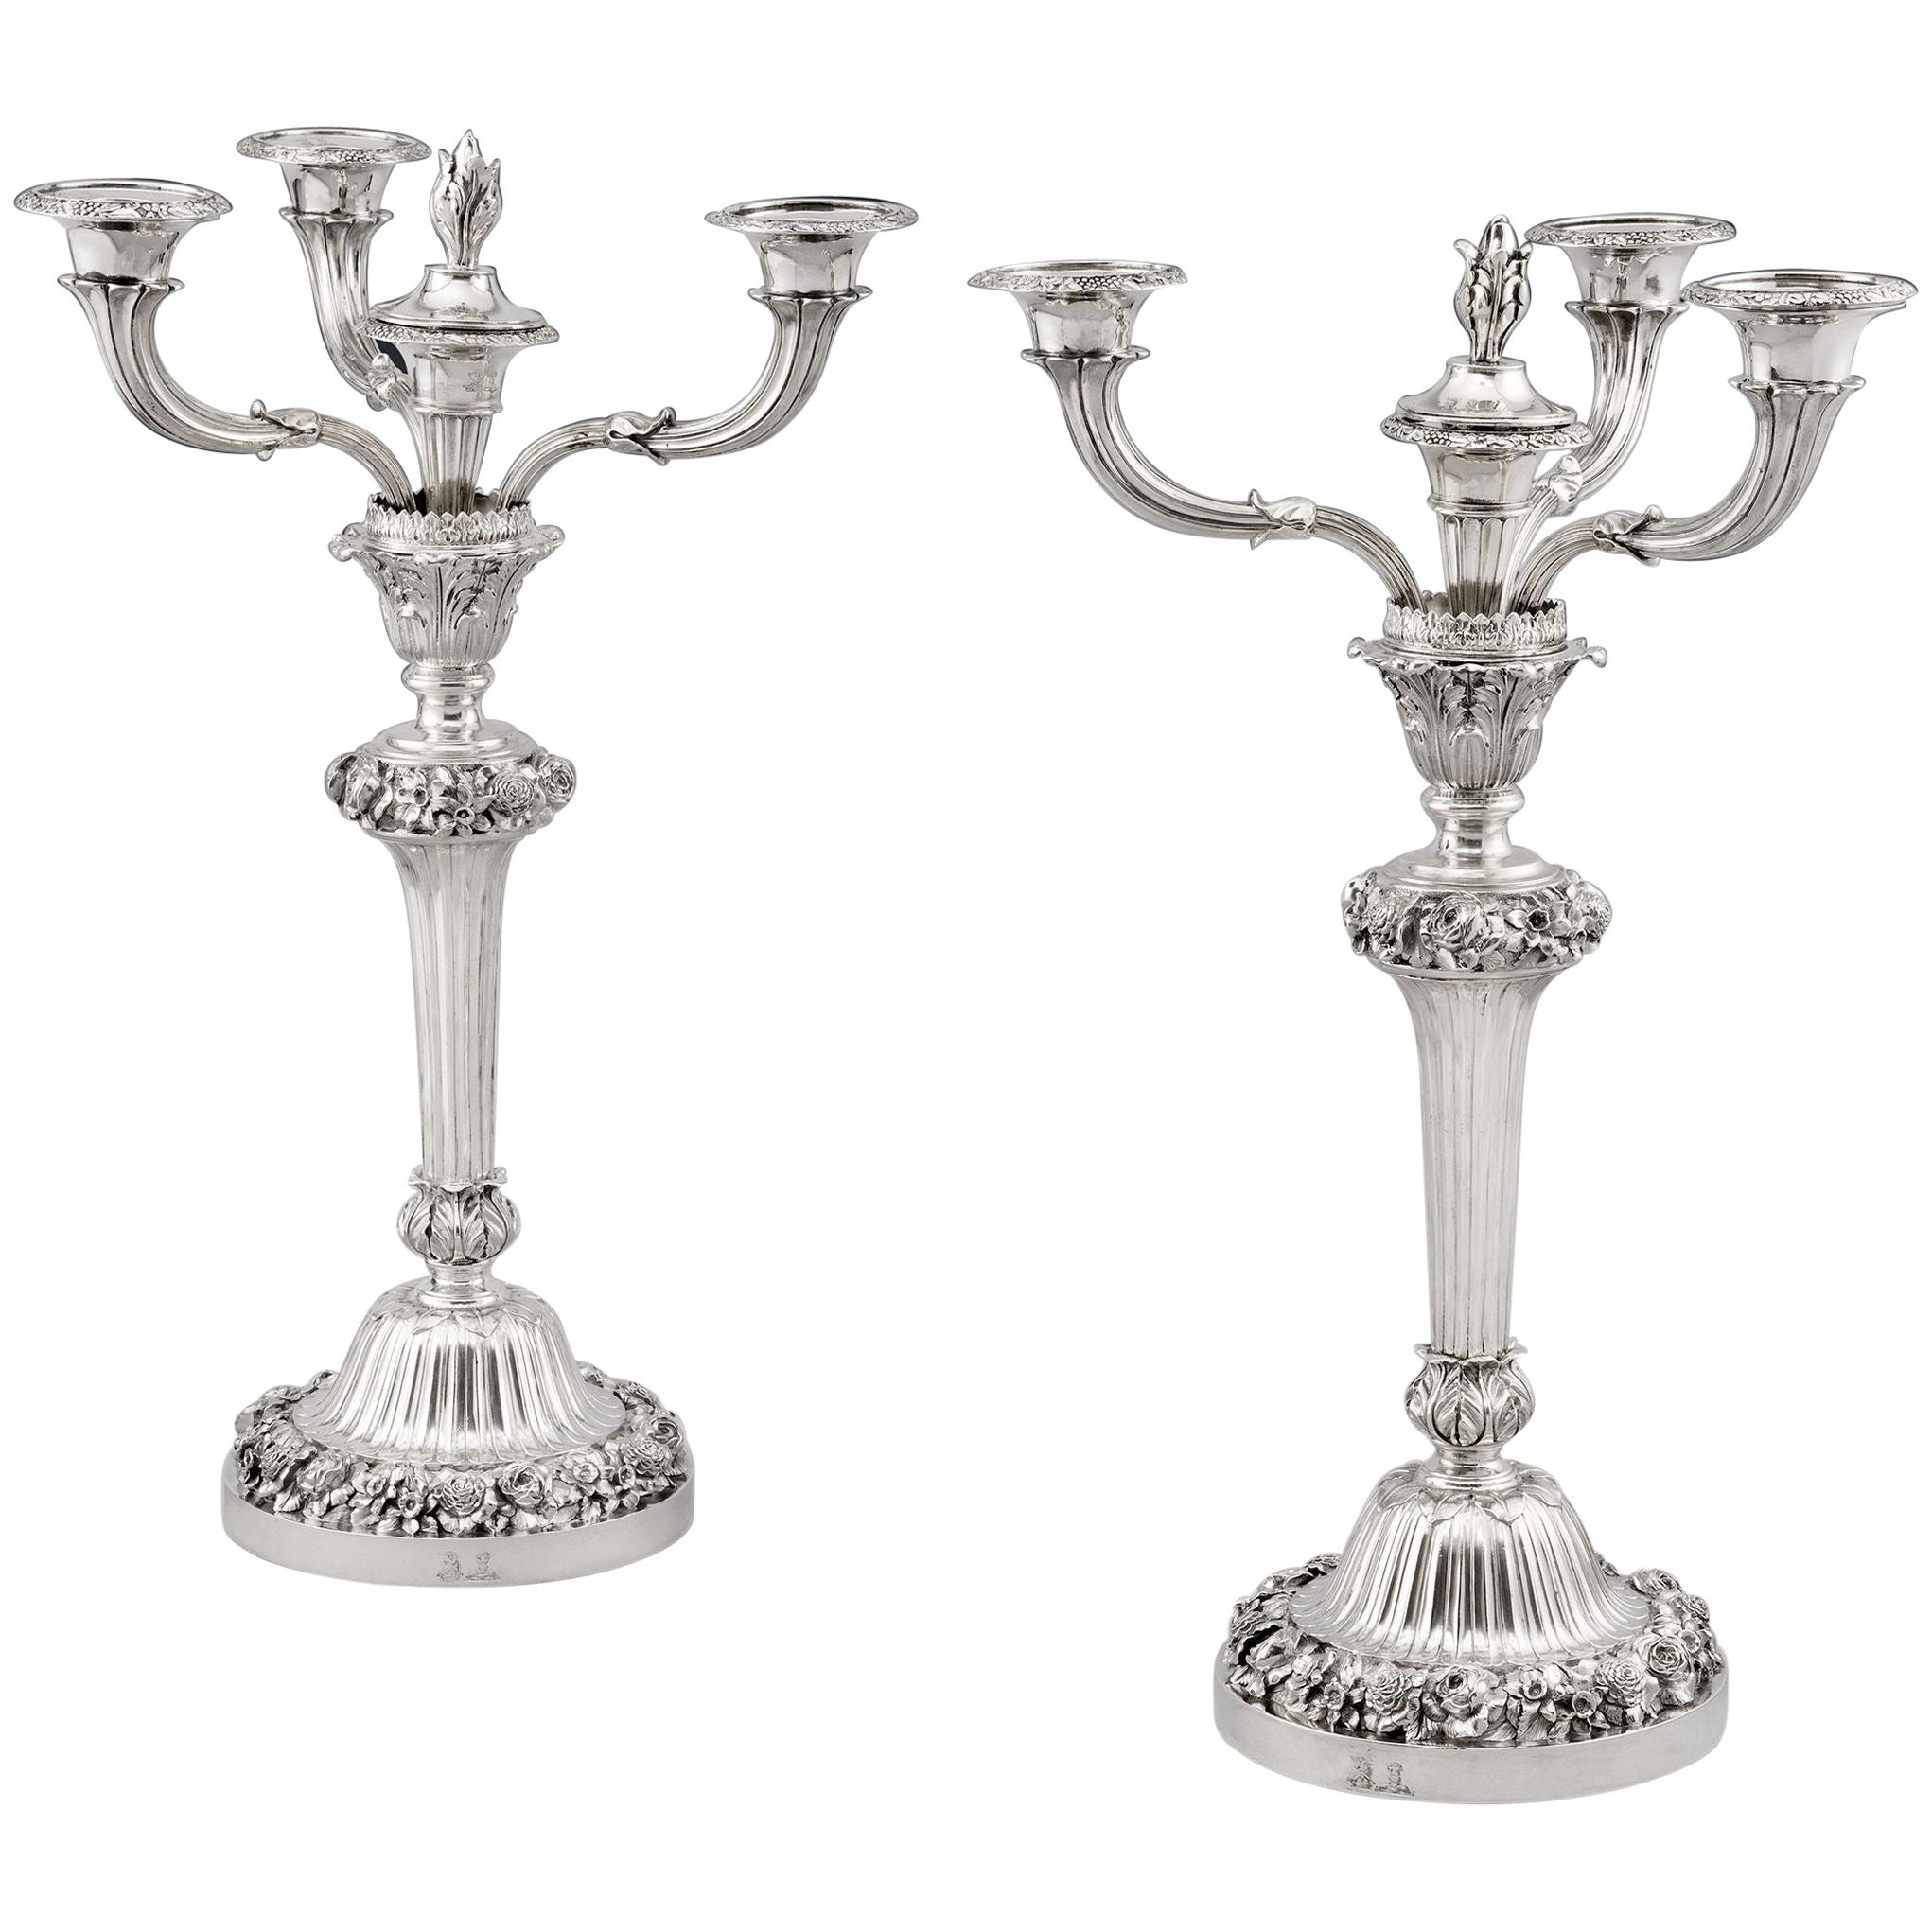 Pair of George IV Cast Candelabra Made in London in 1825-1826 by Benjamin Smith